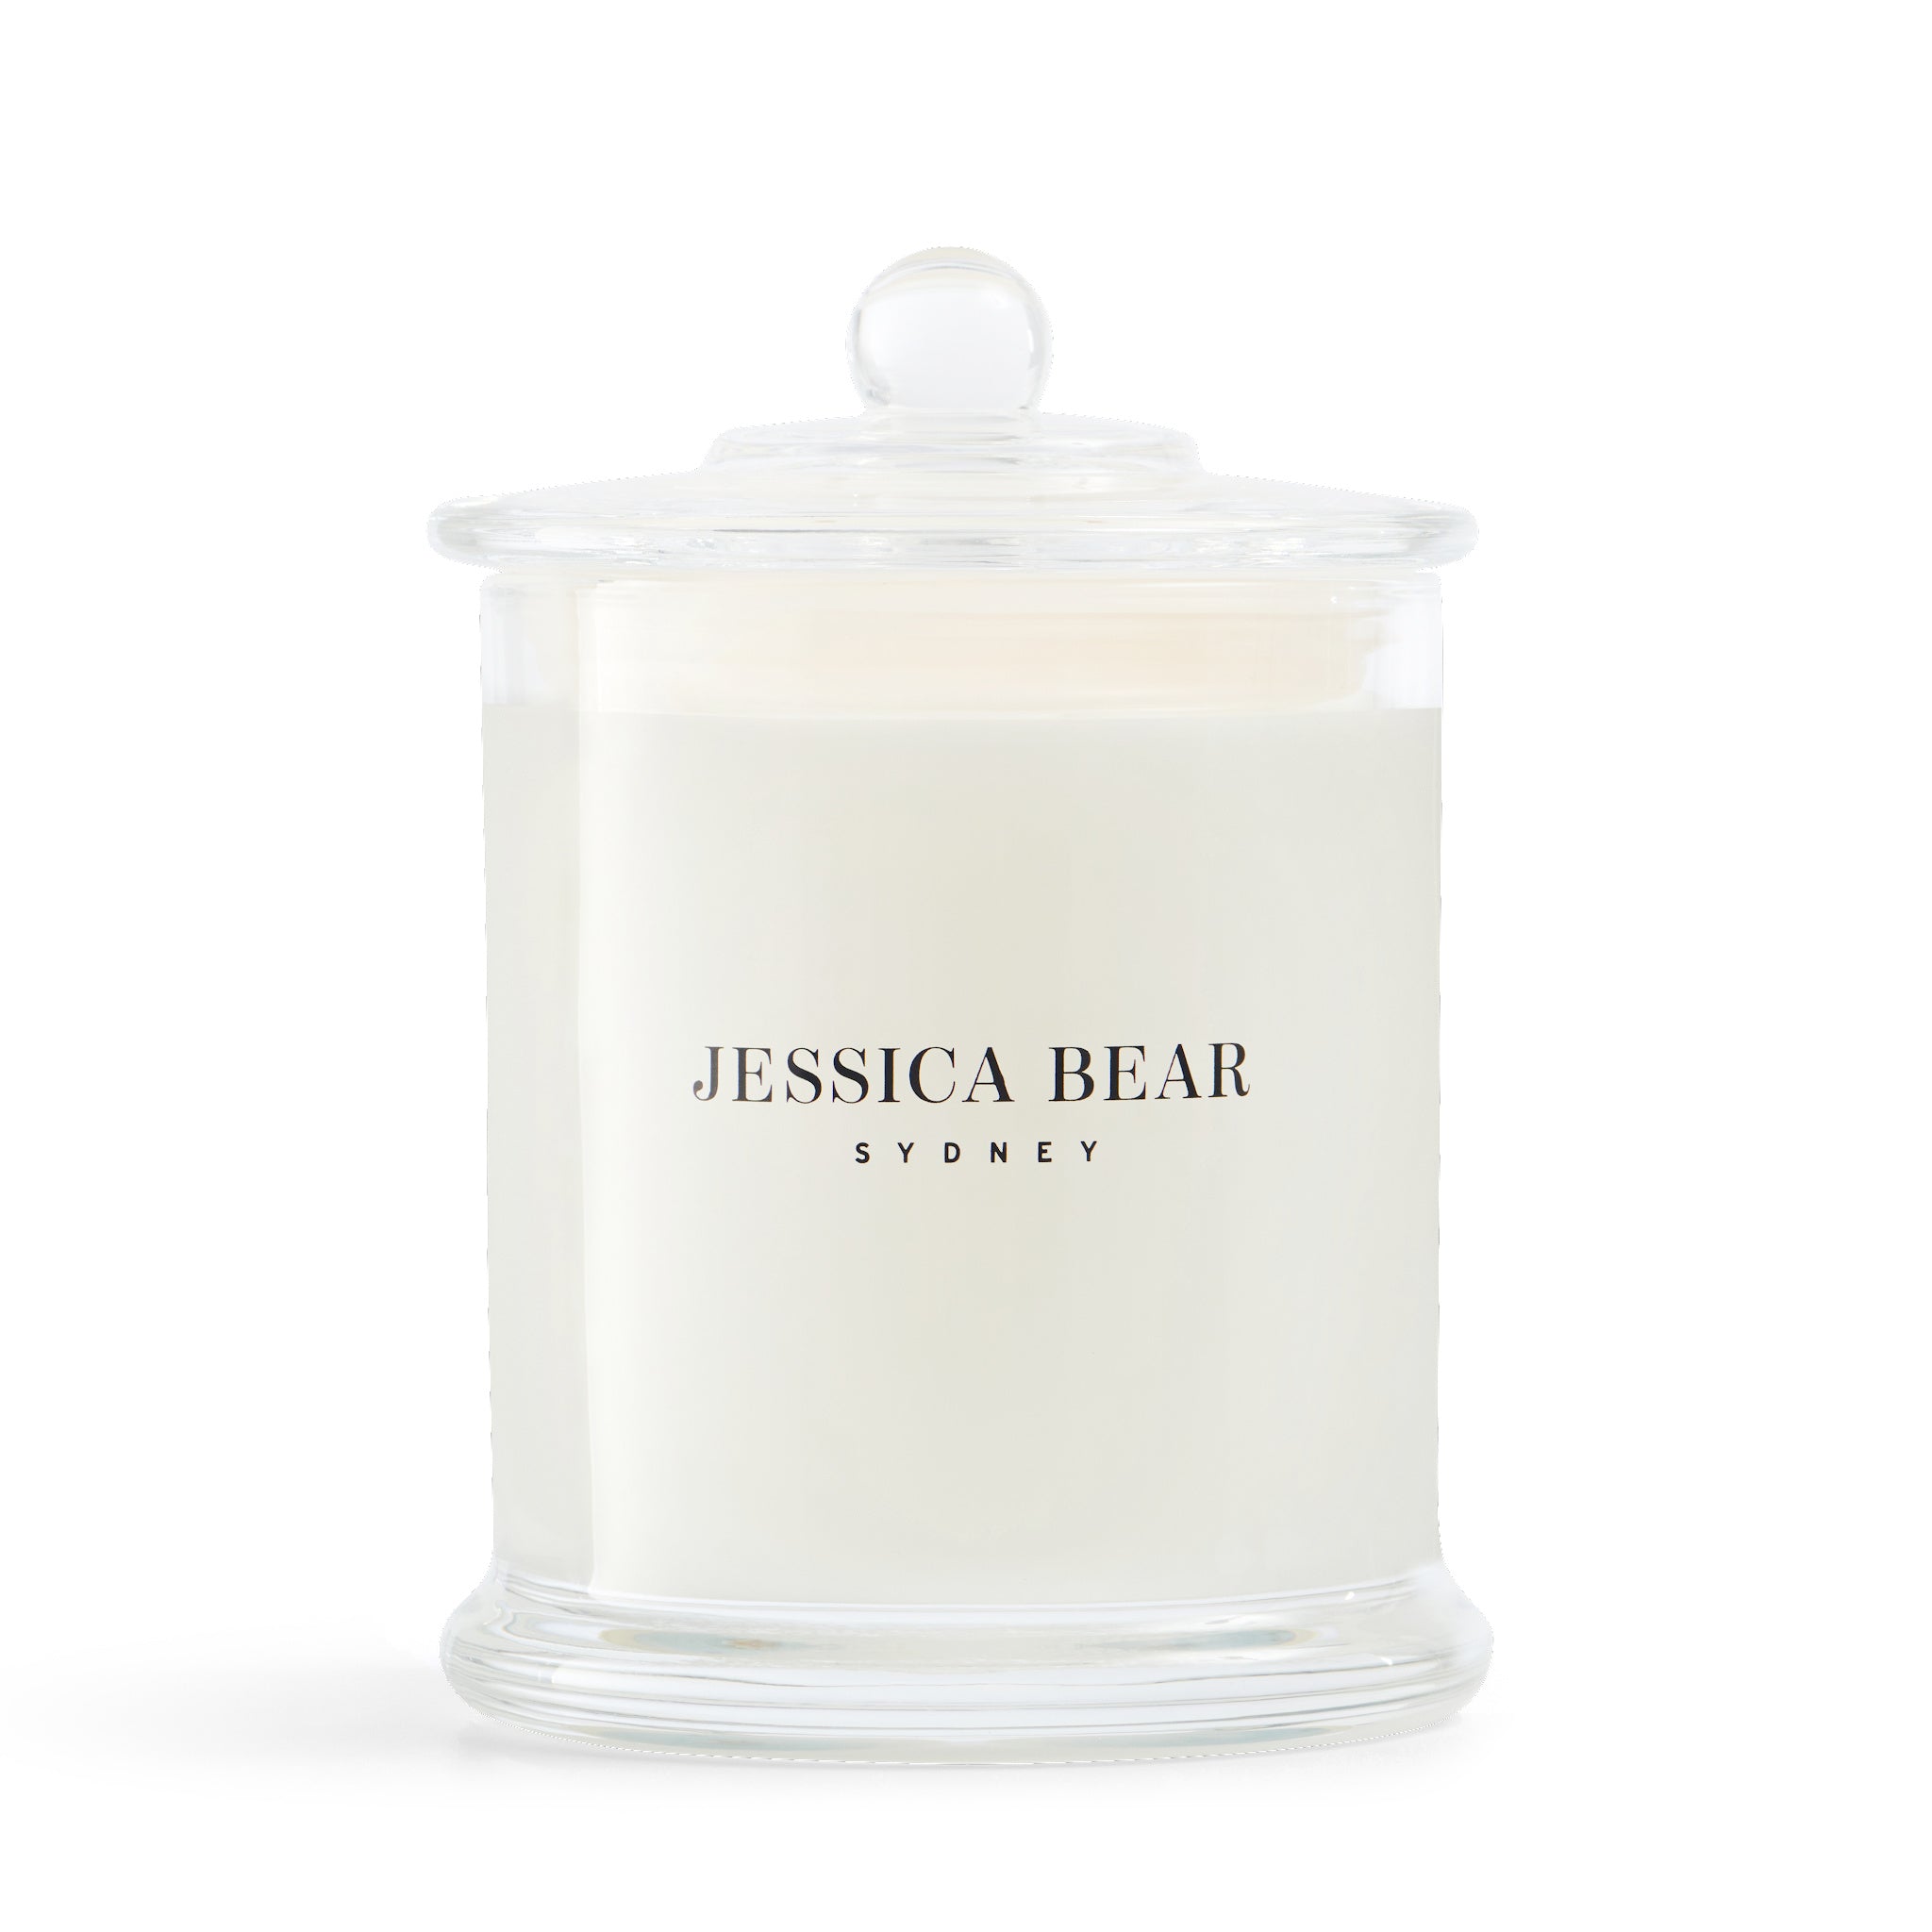 Annalise - 380g Scented Candle